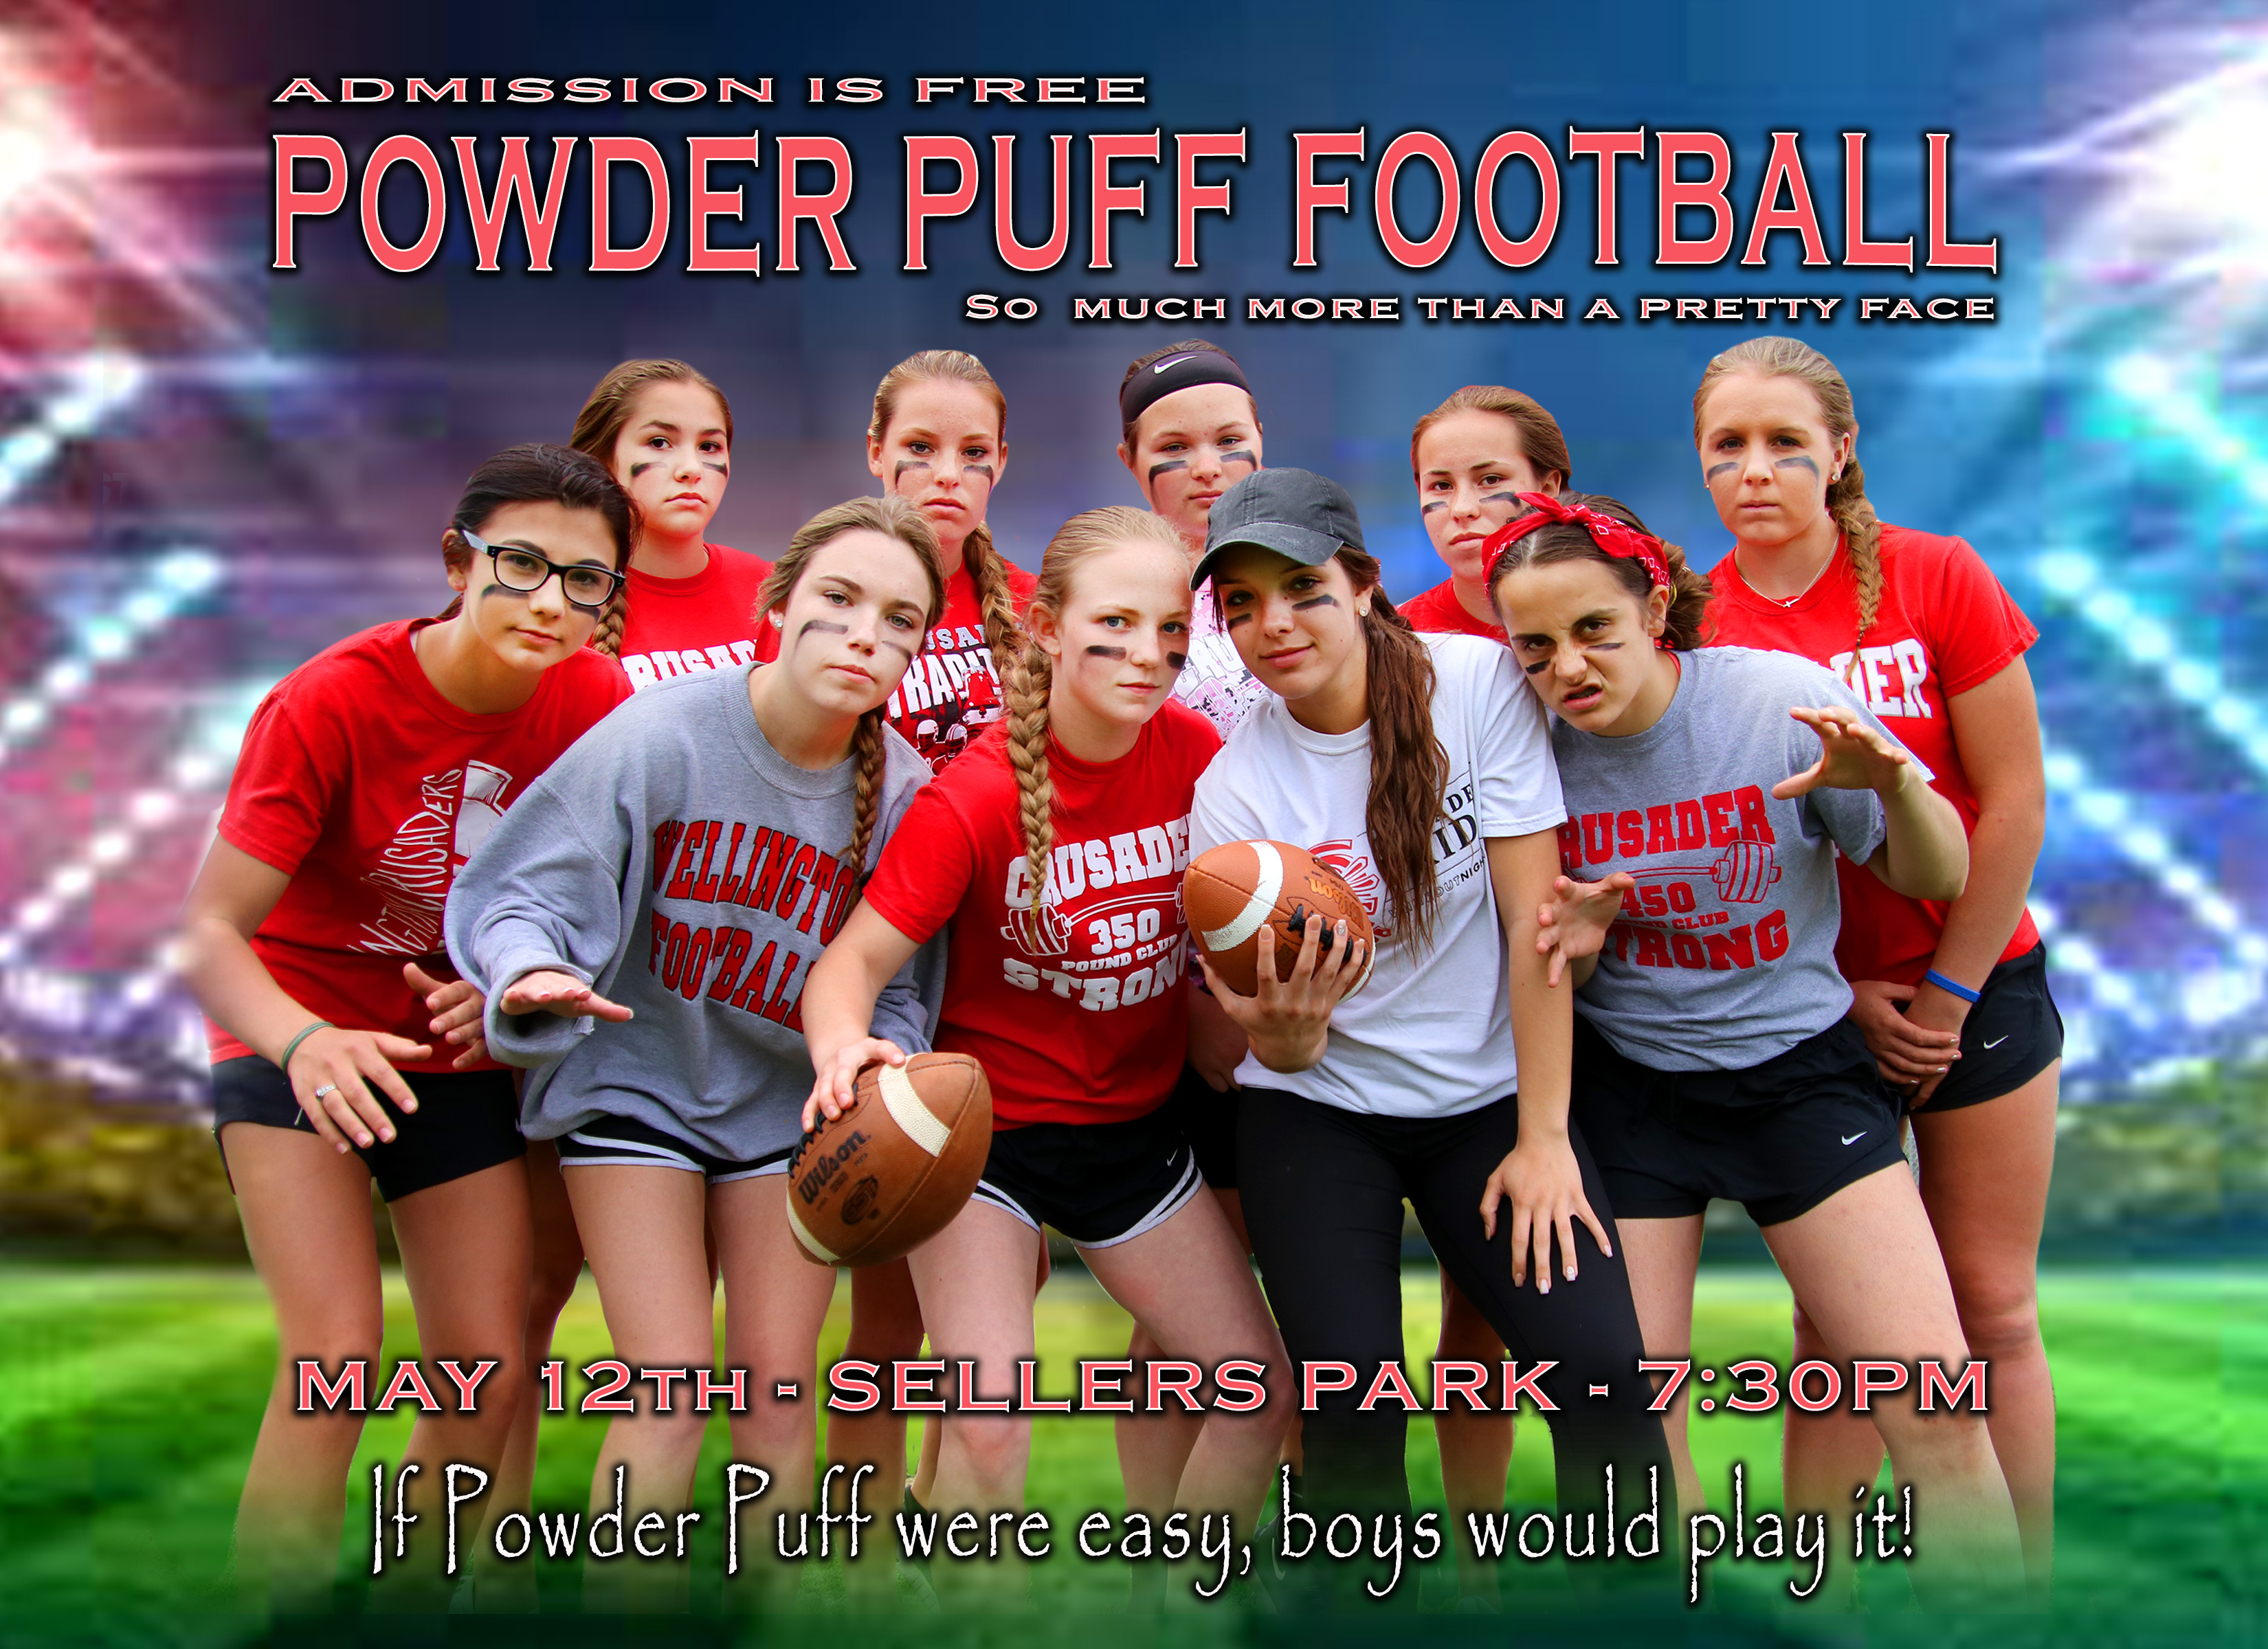 powder puff football league Thus, Roe declares that the baby in the womb is...